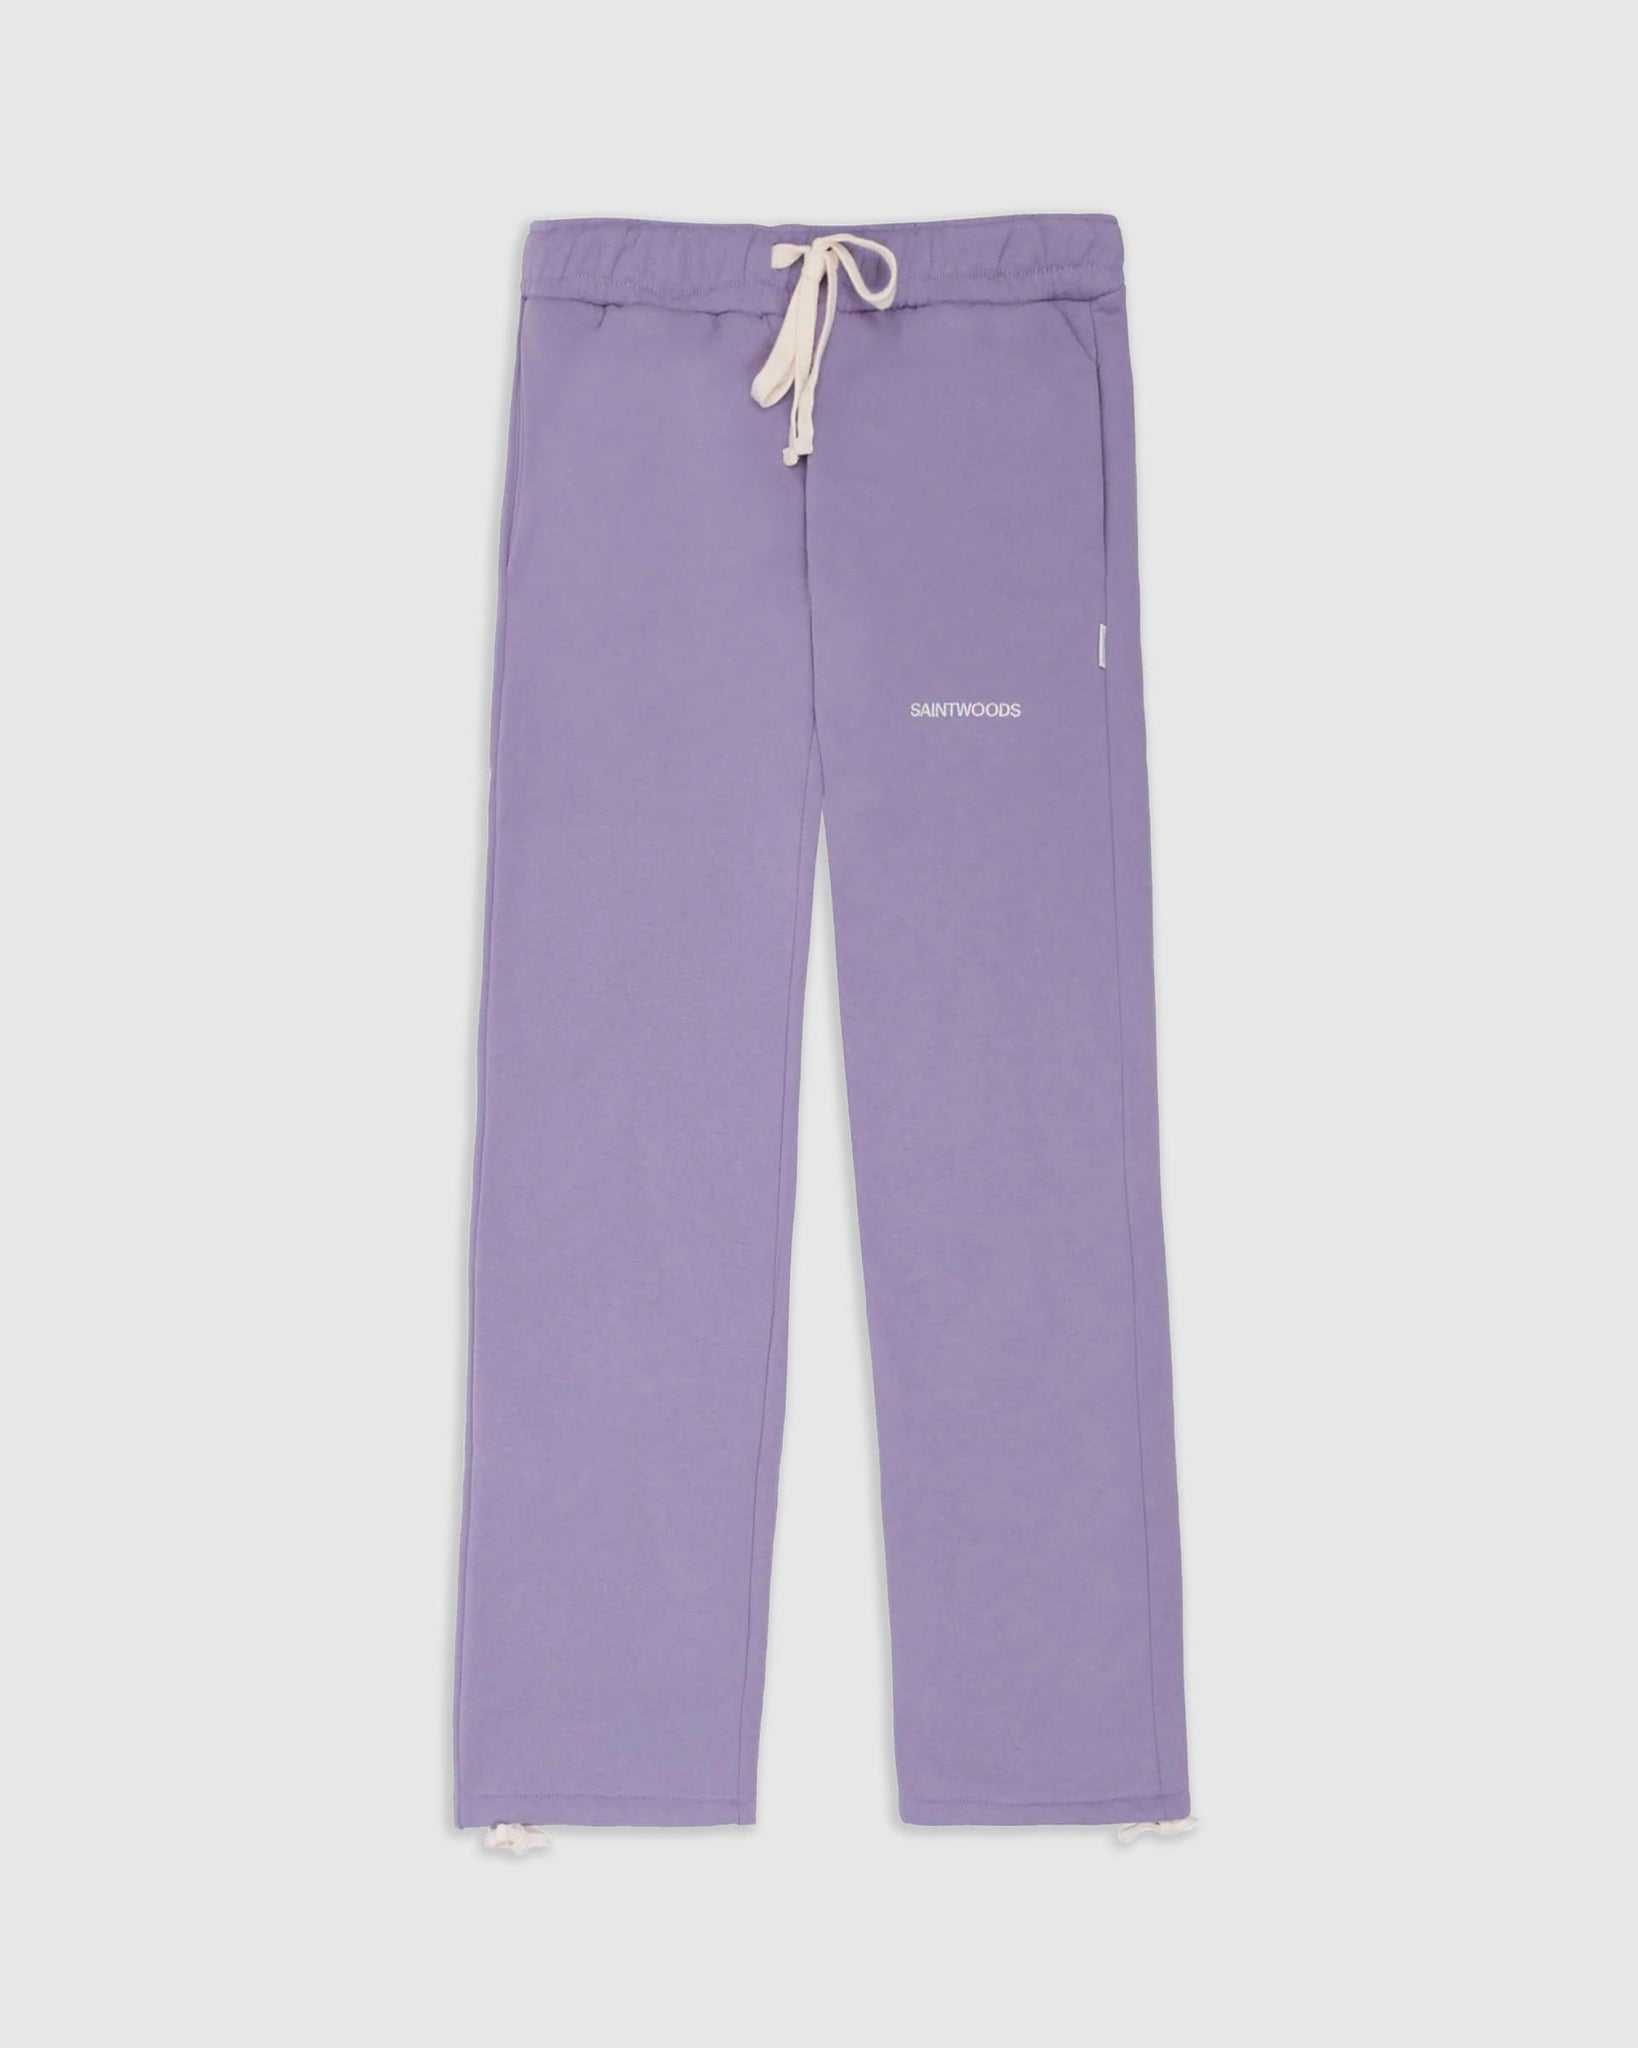 Lavender Sweatpants (W) - {{ collection.title }} - Chinatown Country Club 